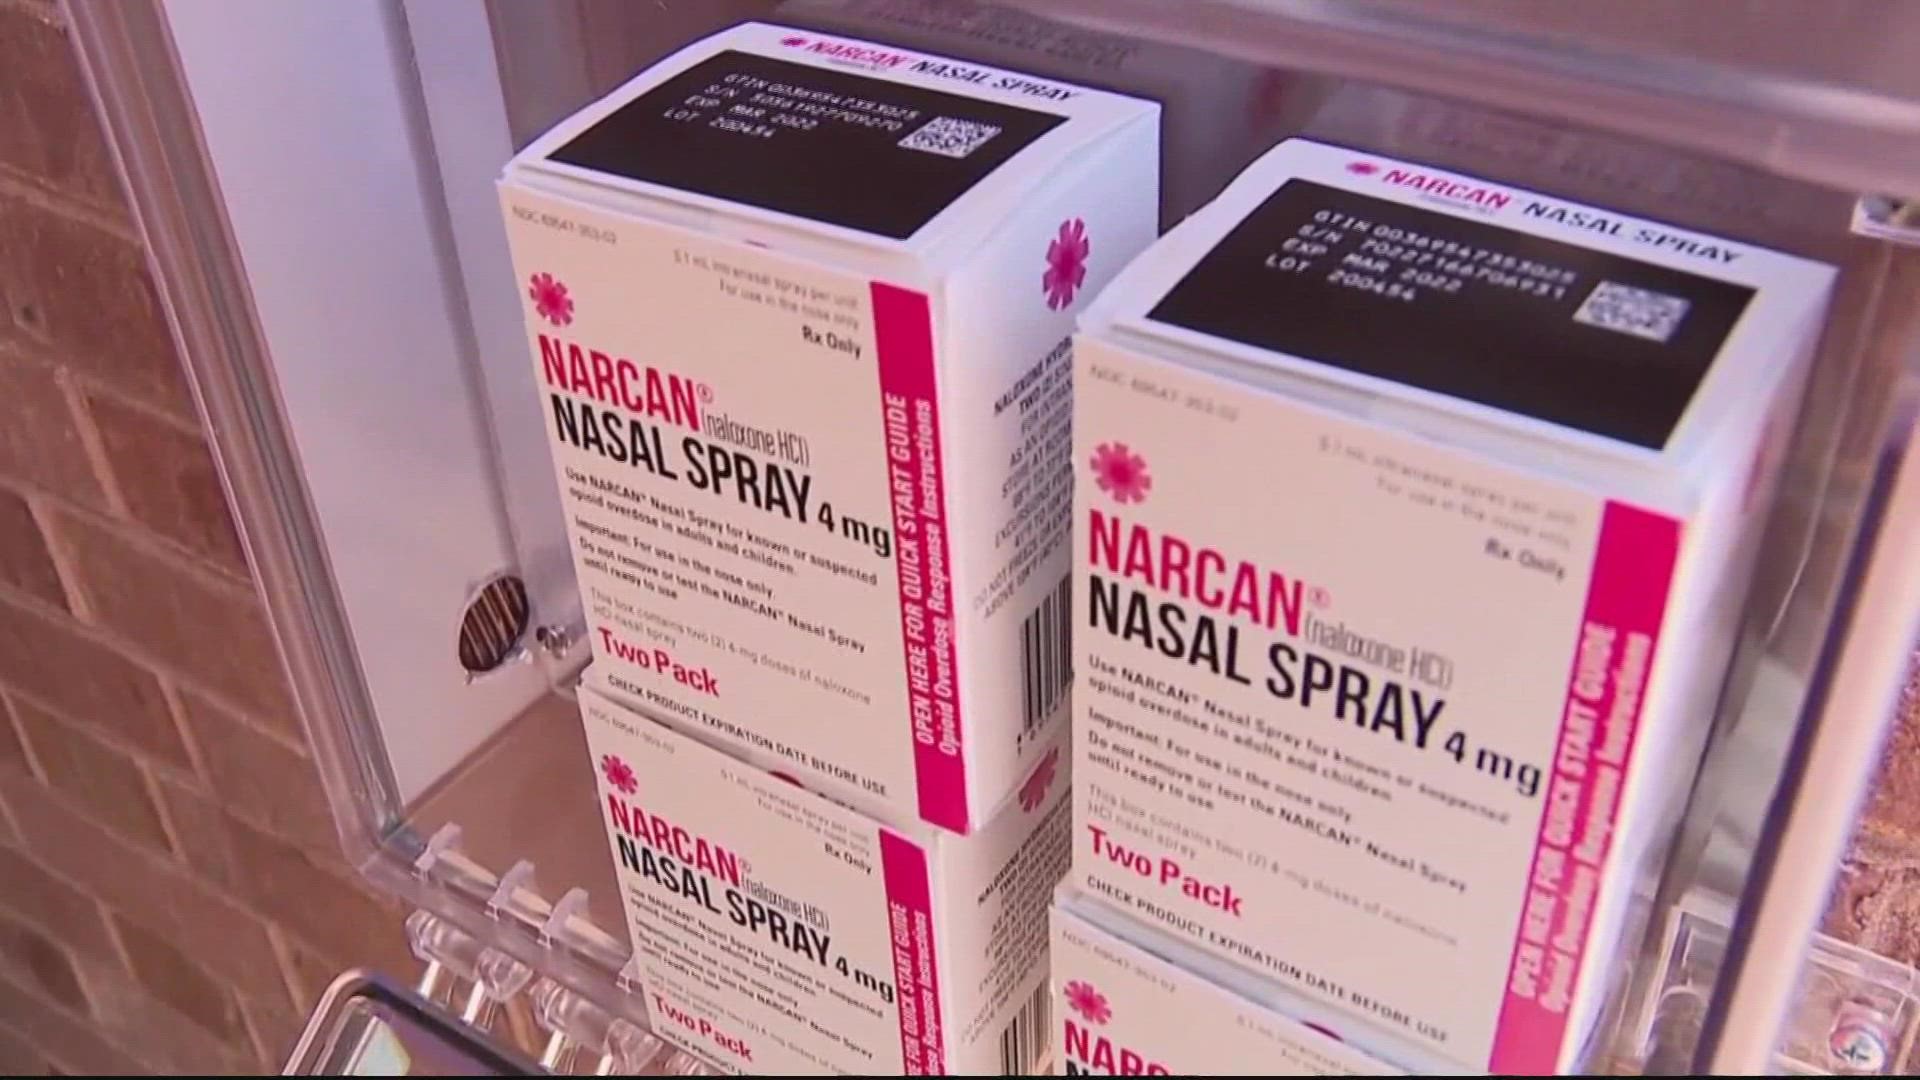 School administrators have had to use Narcan 11 times so far this school year.